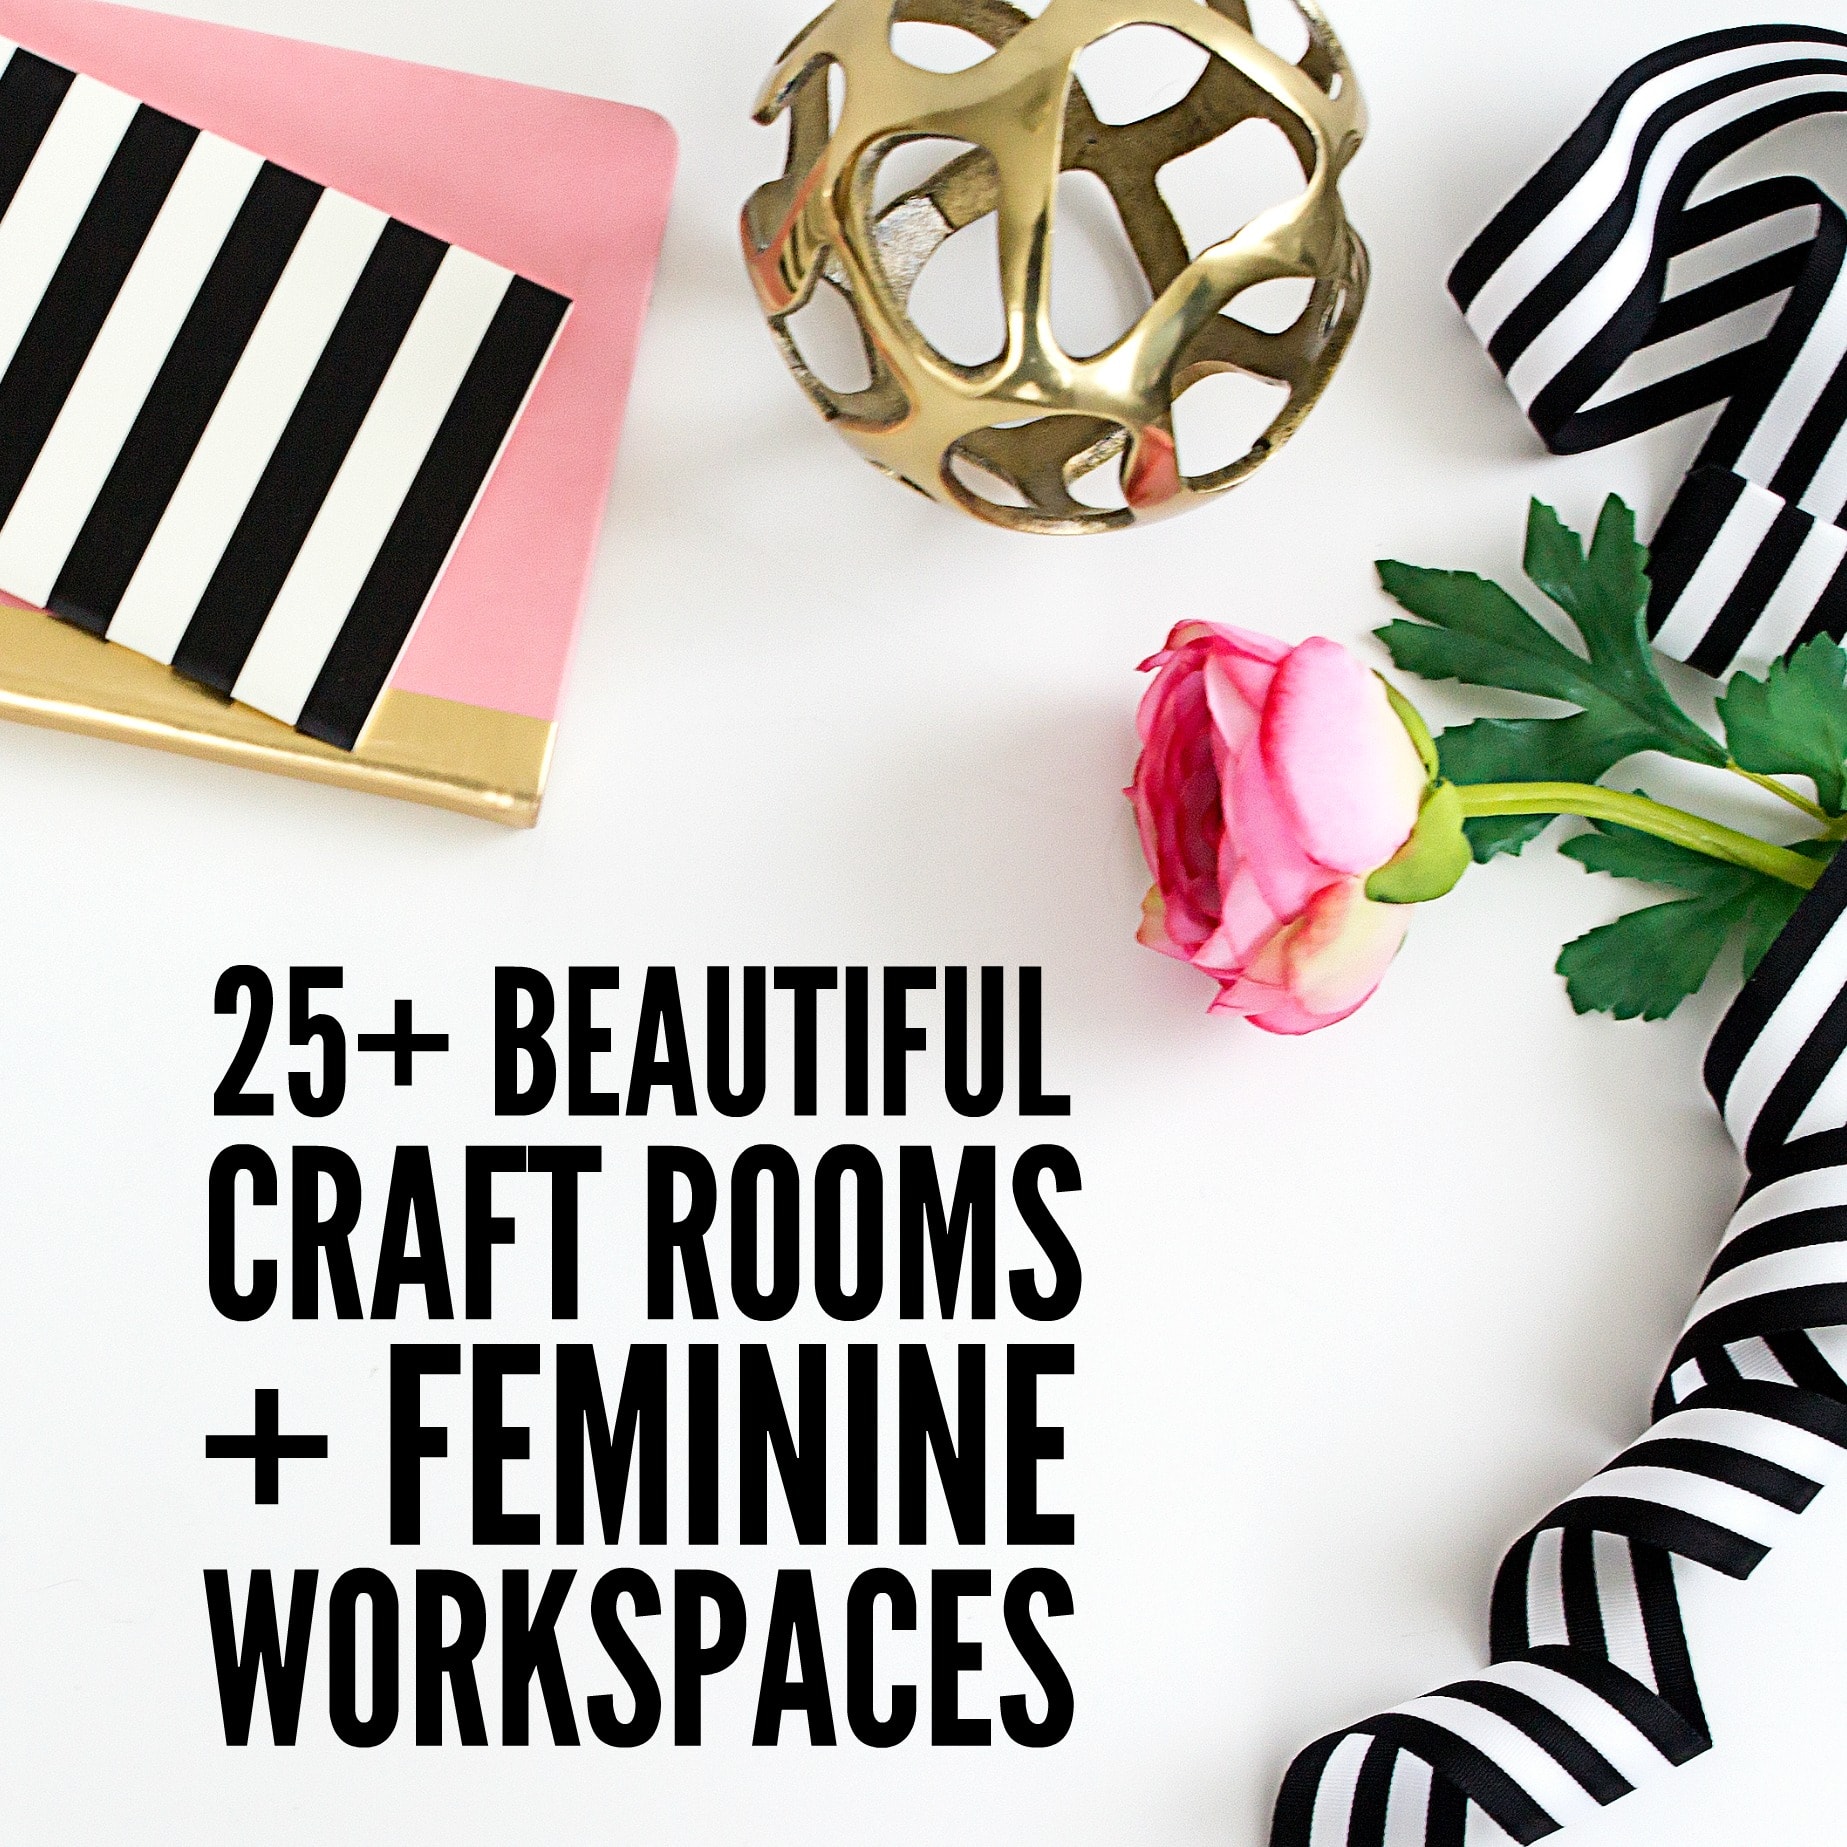 25+ Beautiful Craft Rooms + Workspaces